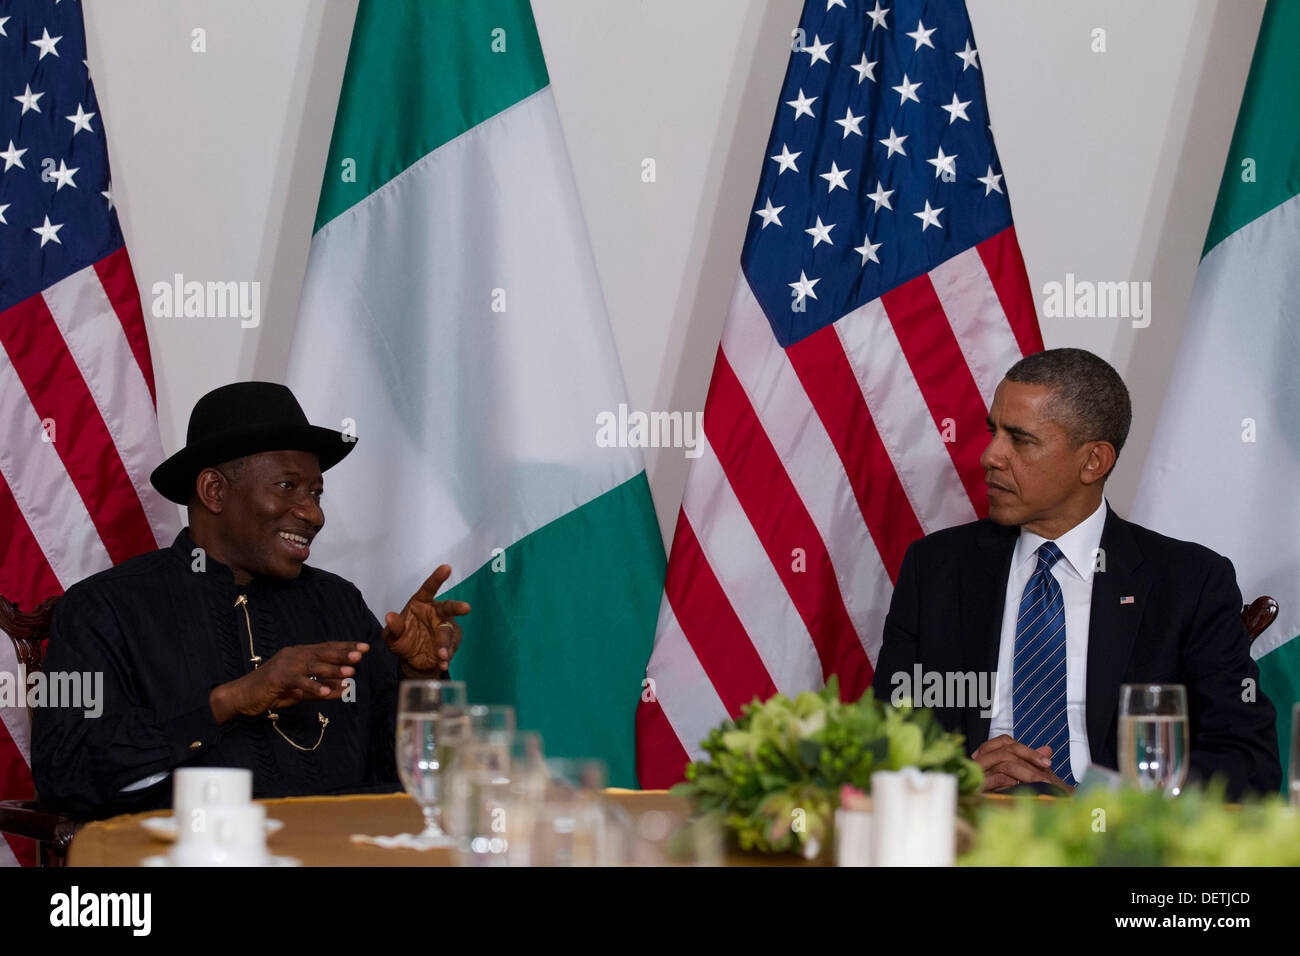 New York, New York. 23rd Sep, 2013. President Goodluck Jonathan of Nigeria and United States President Barack Obama meet in New York, New York, on Monday, September 23, 2013. Credit: Jin Lee / Pool via CNP/dpa/Alamy Live News Stock Photo